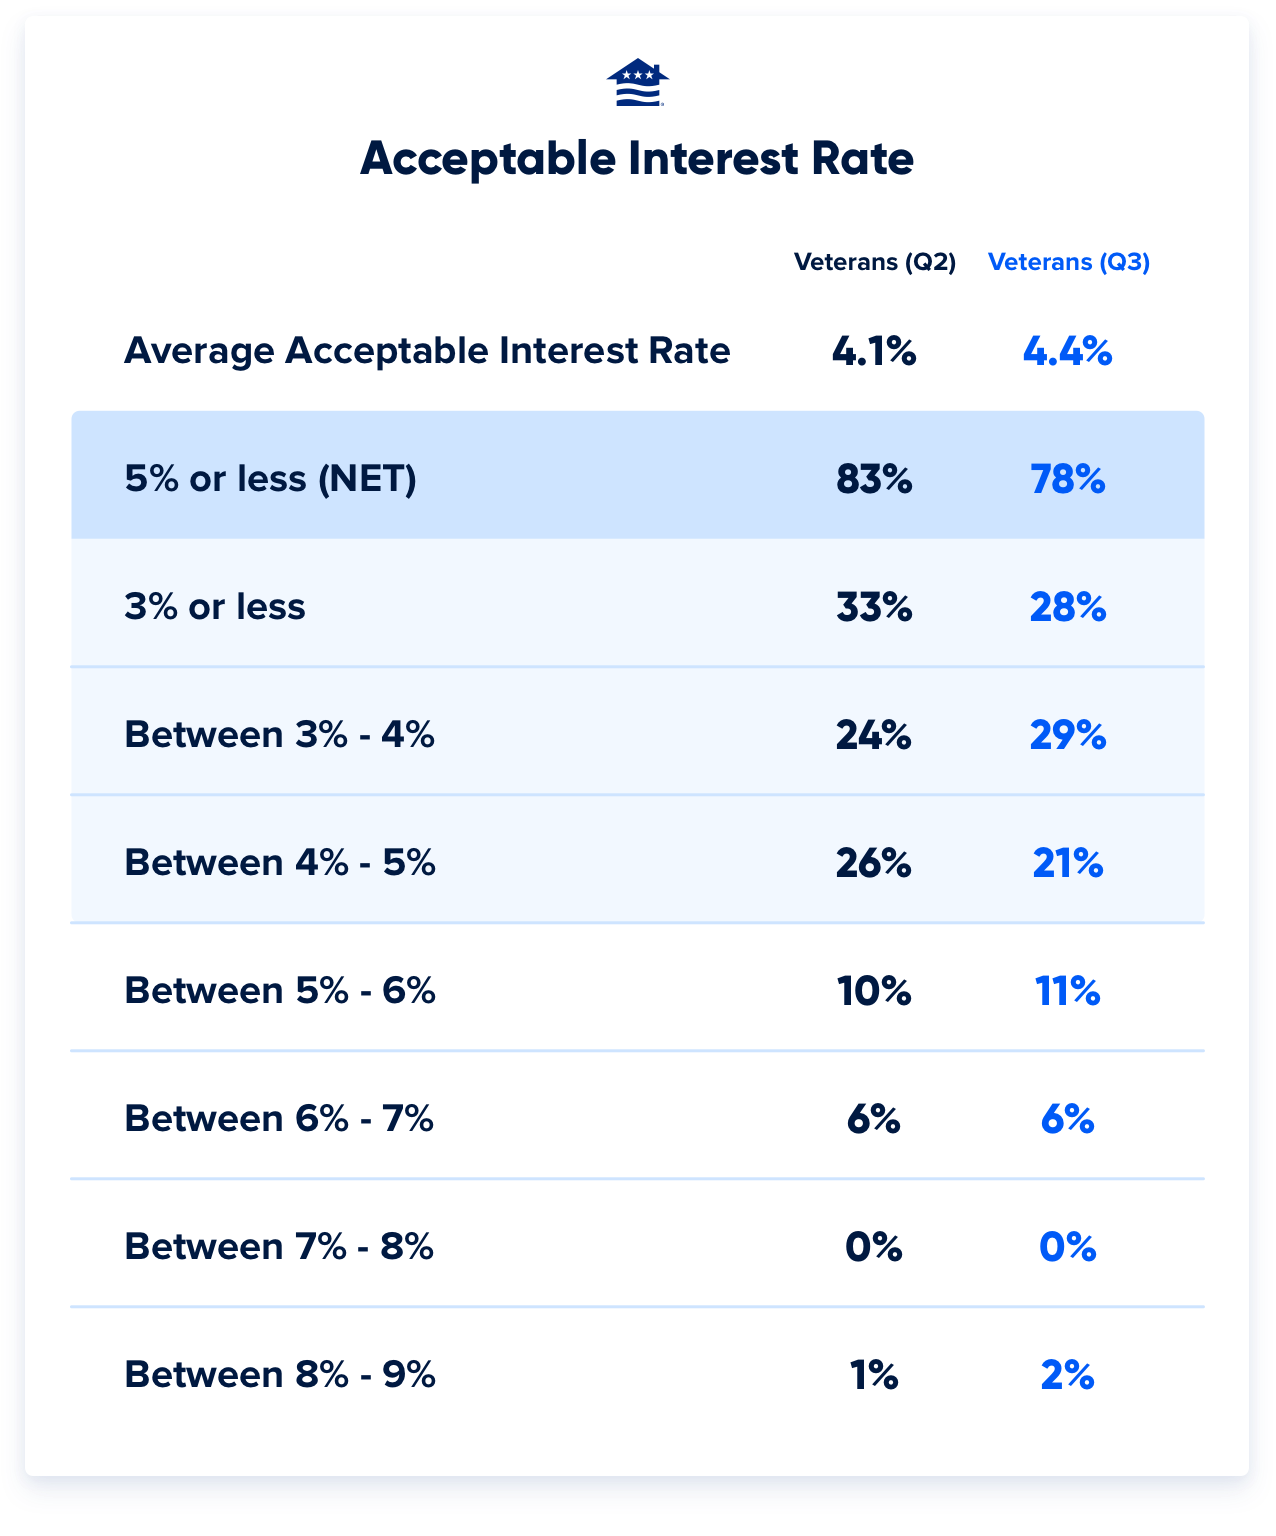 ​At the same time, the average for what Veterans would consider an acceptable mortgage rate ticked up slightly in the third quarter, to just under 4.5%. Only 1-in-5 Veterans consider a rate at or above 5% to be acceptable.